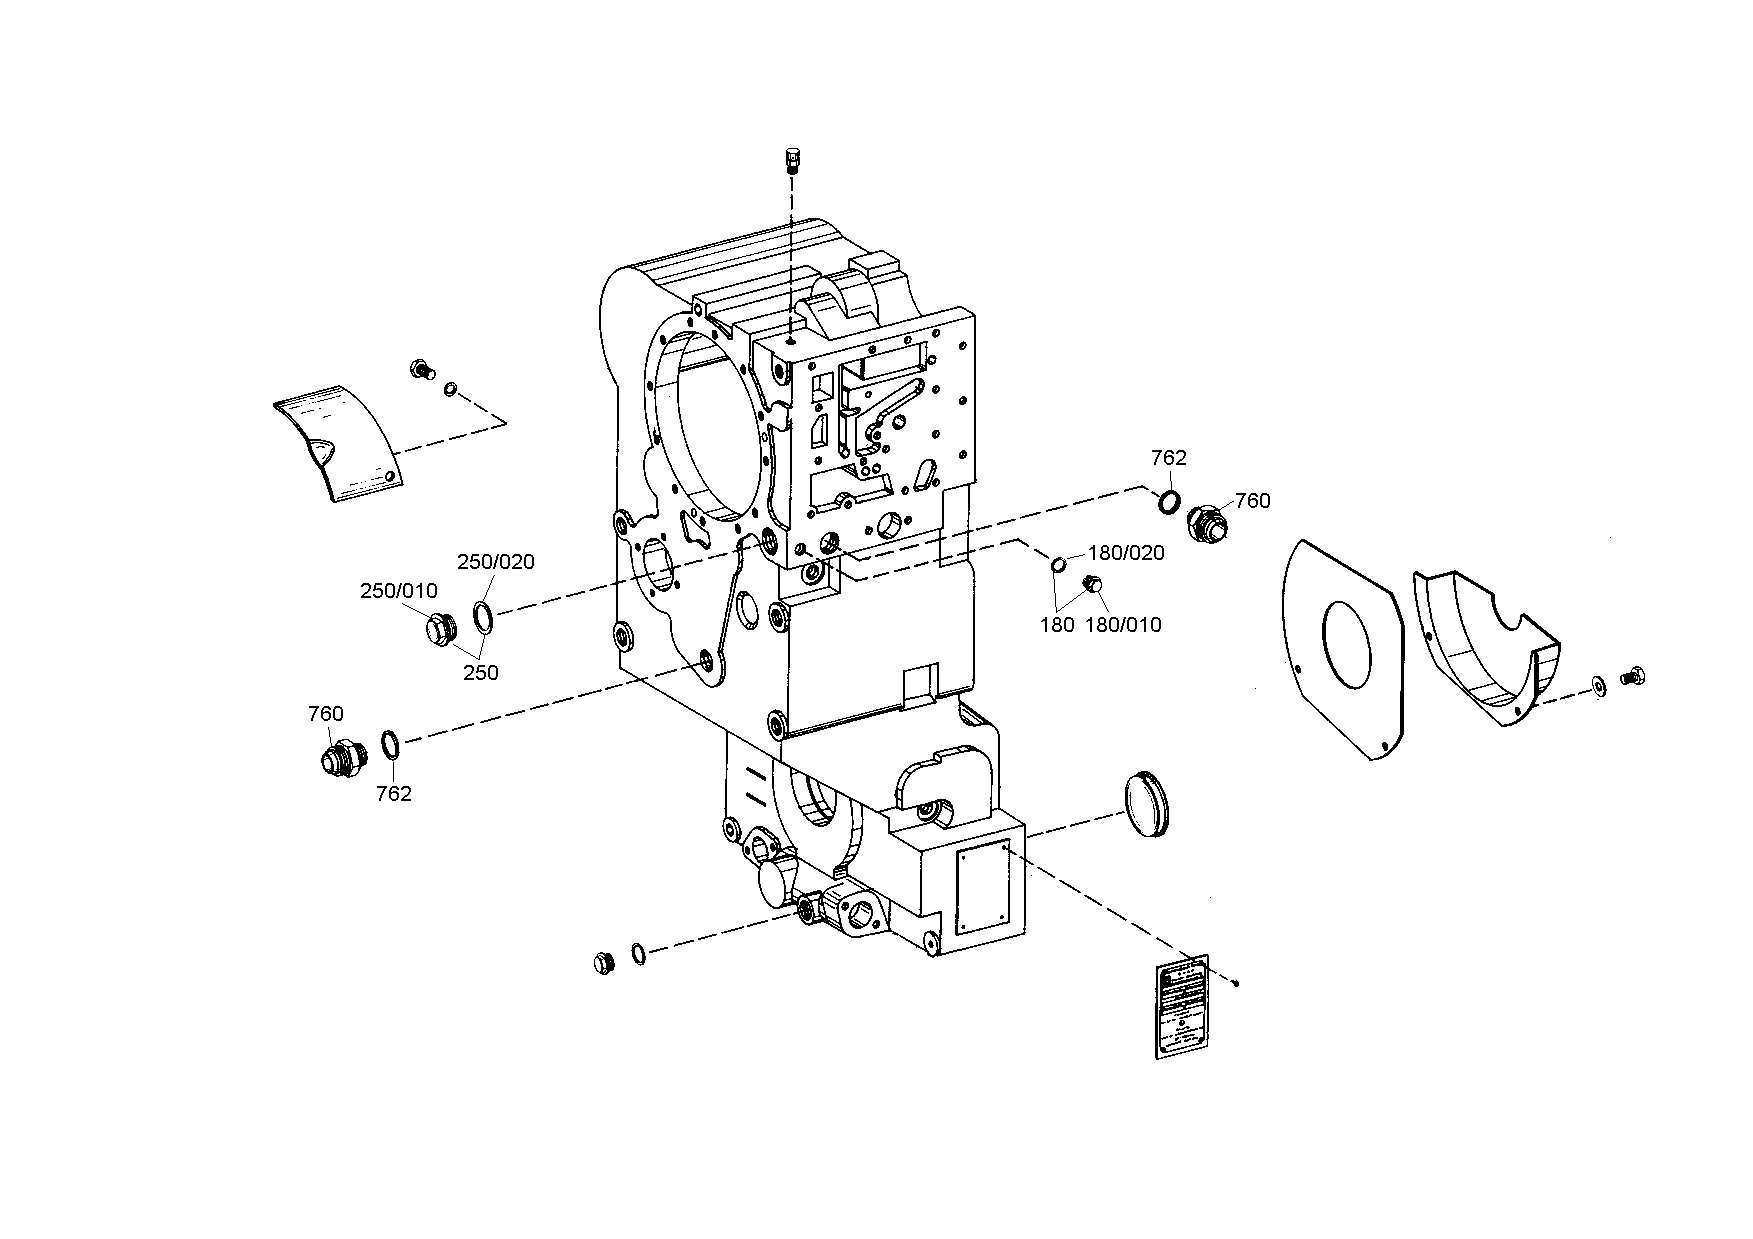 drawing for NACCO-IRV 0378516 - ADAPTER (figure 1)